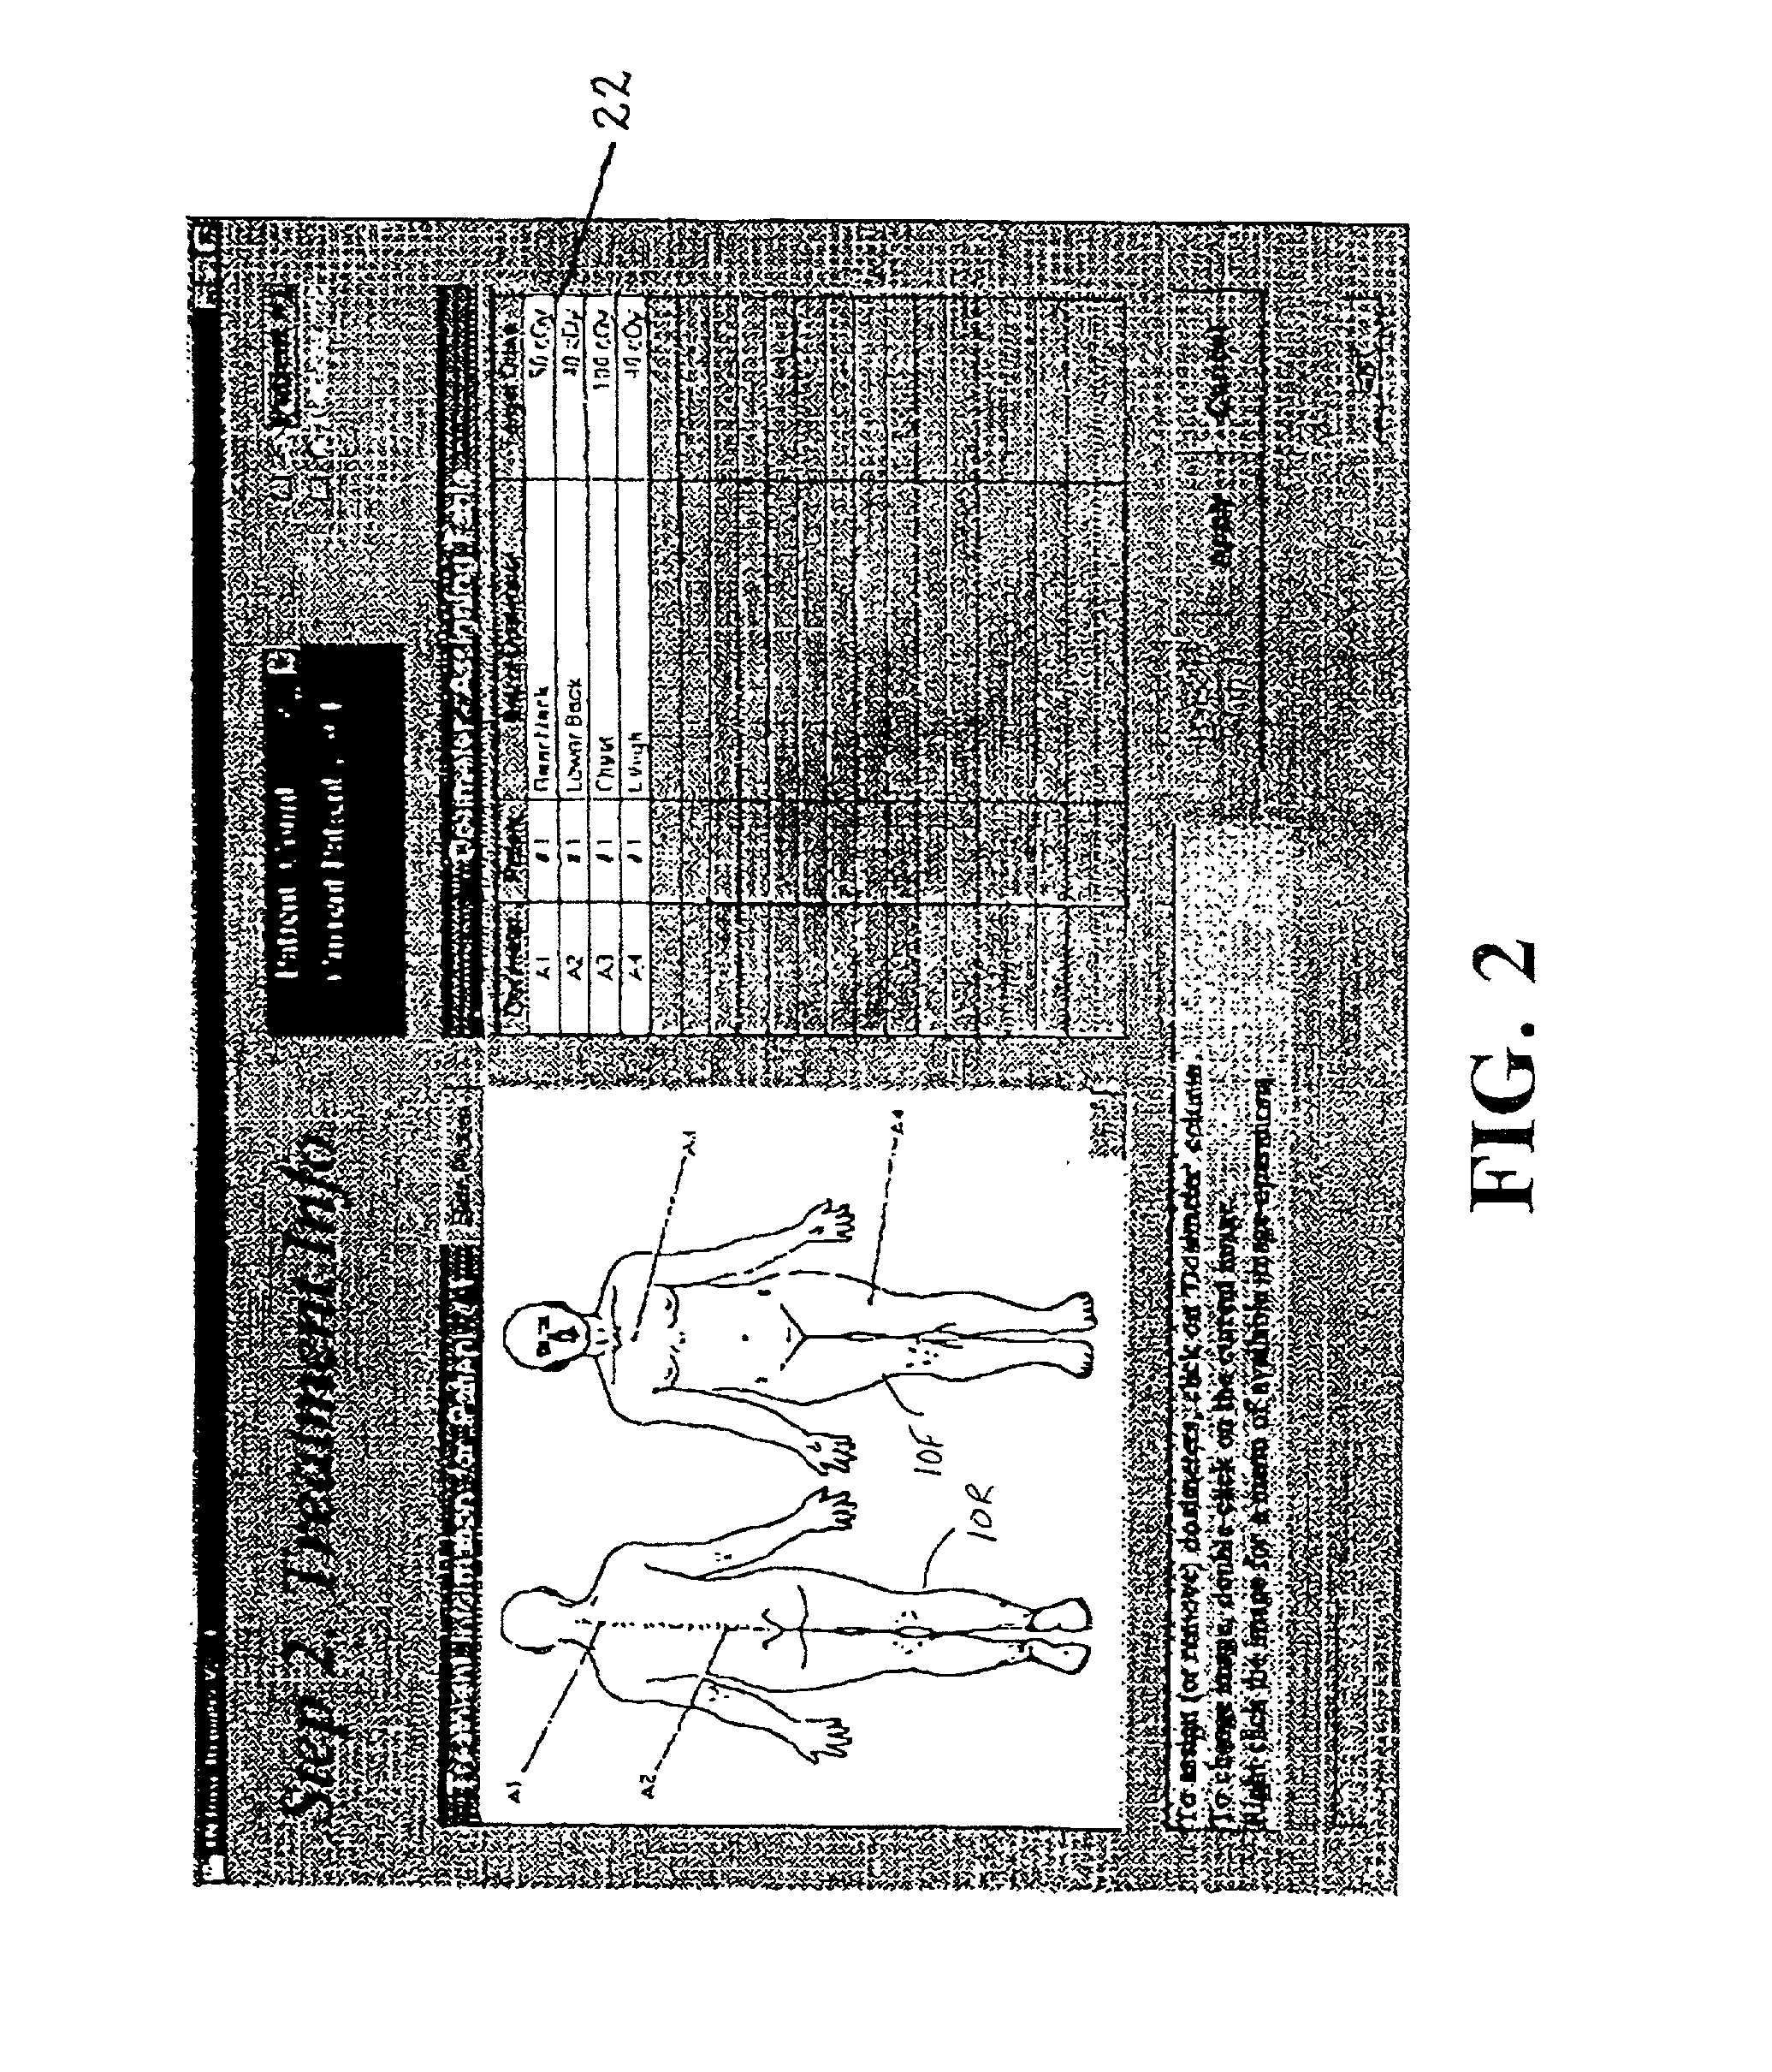 Computer assisted radiotherapy dosimeter system and a method therefor